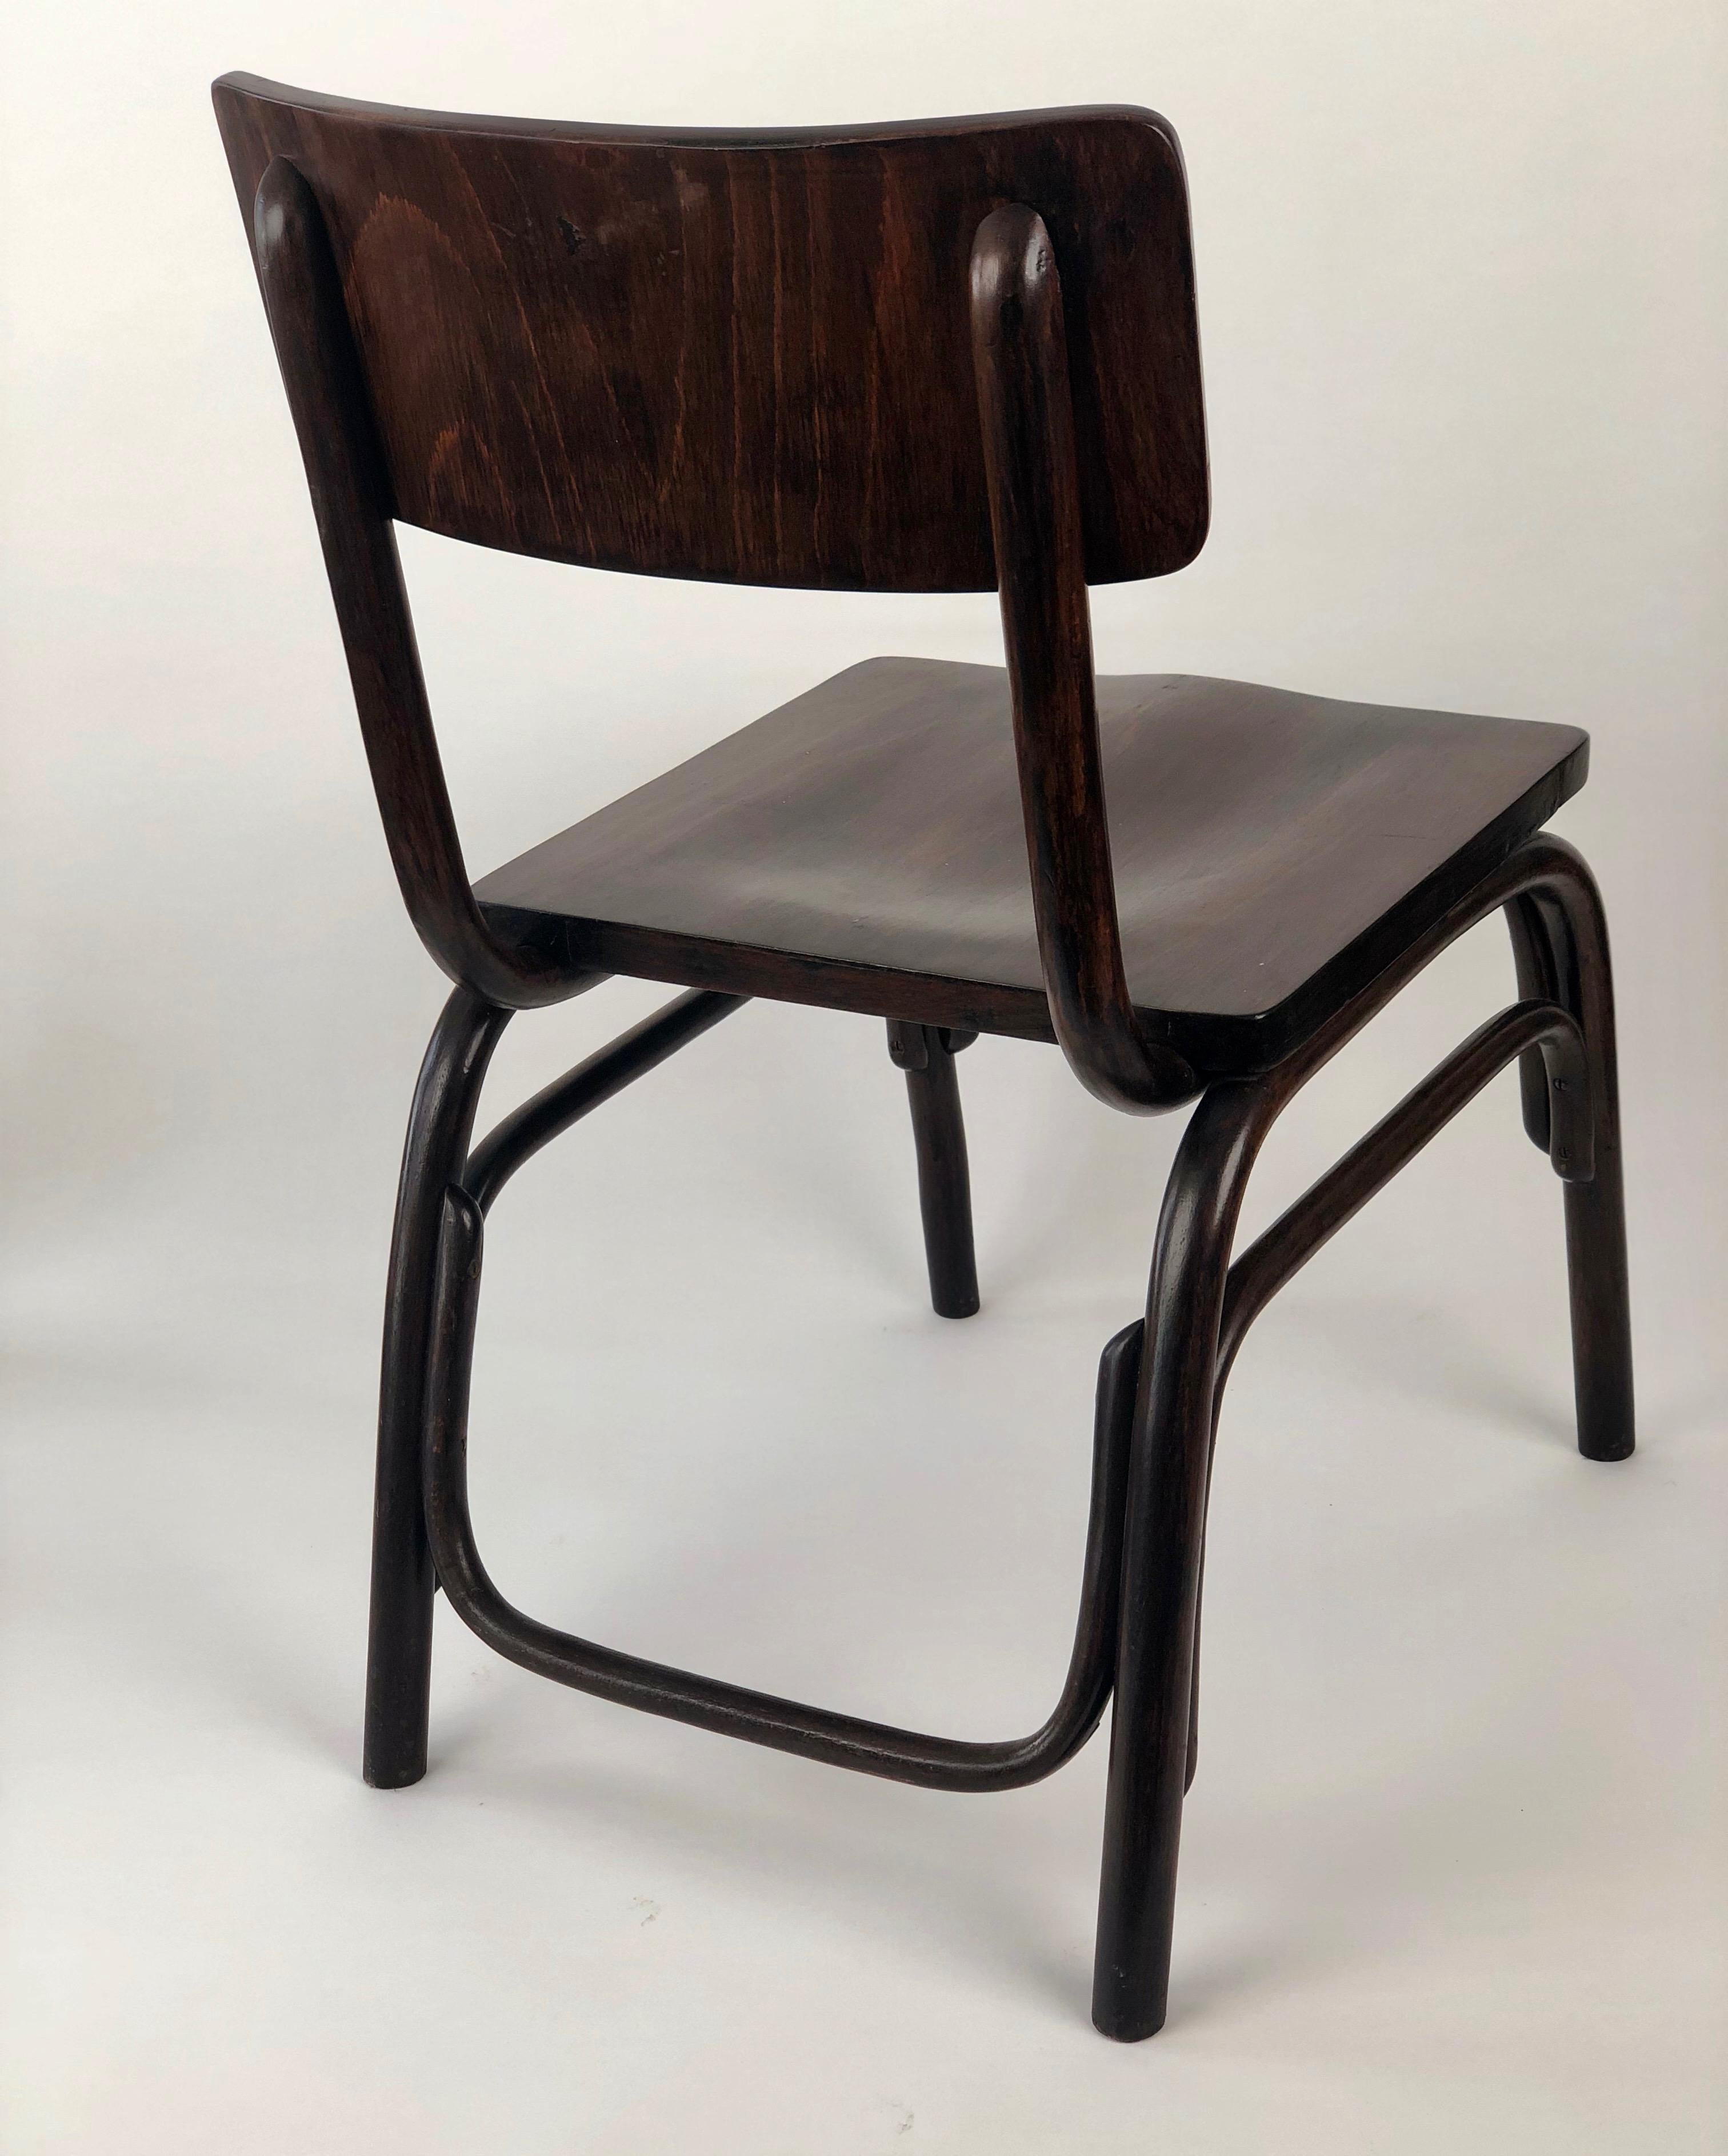 The architect and designer Ferdinand Kramer designed the chair B403 for Thonet in1927. 
Developed during the construction of the New Frankfurt, it was initially used in vocational education.
As opposed to desk chairs and delicate coffee house